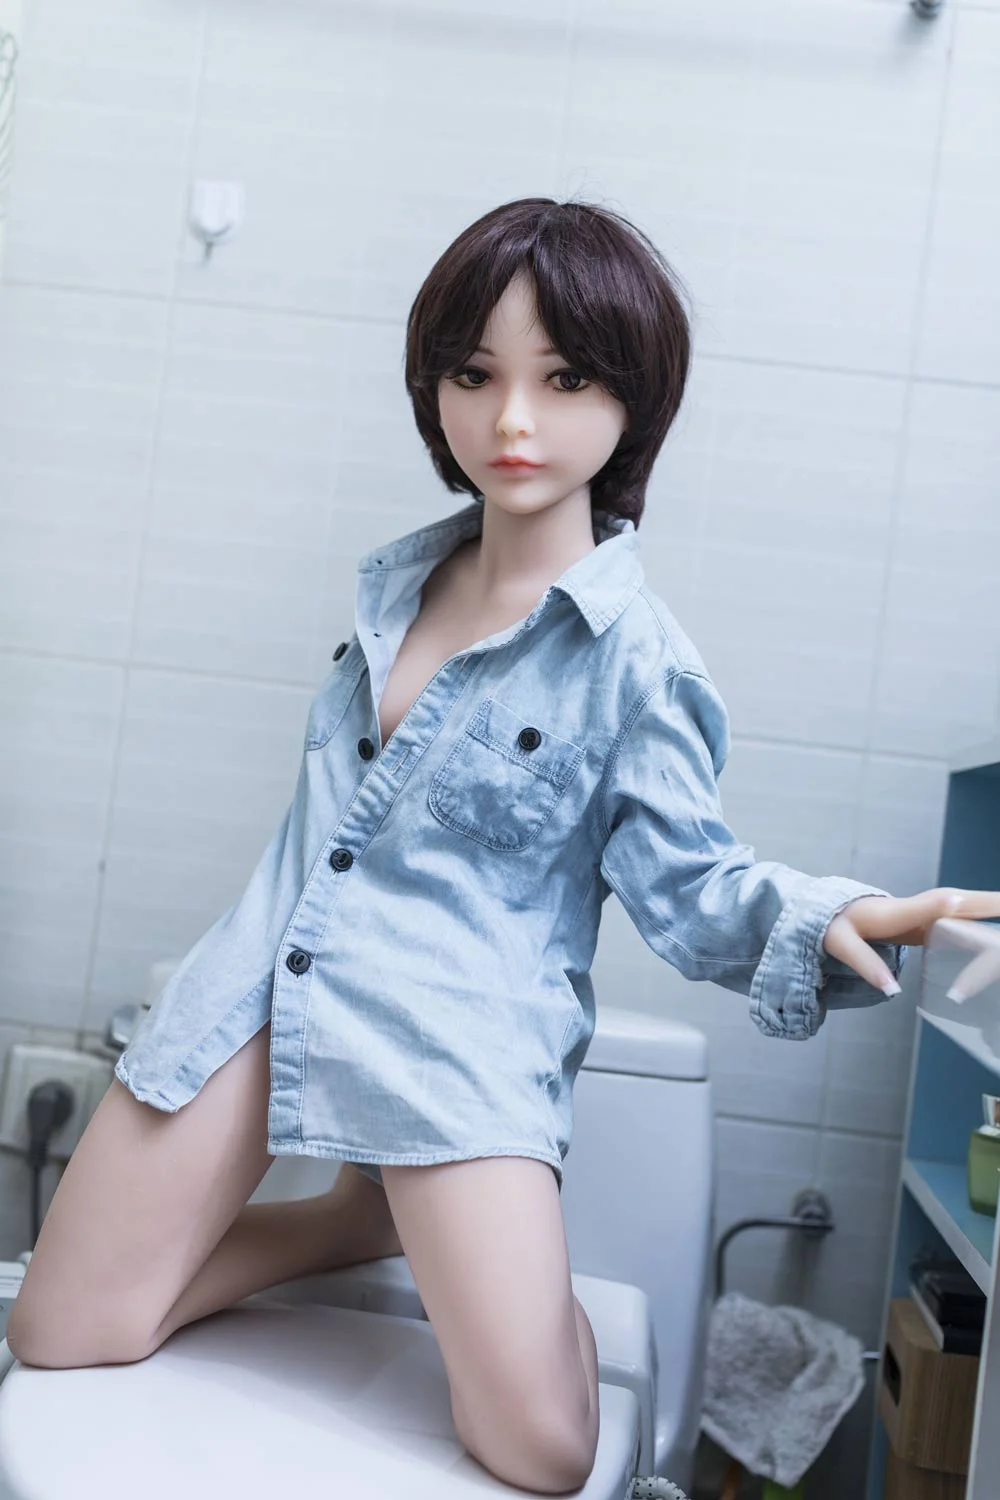 Mini sex doll with legs kneeling on the ground